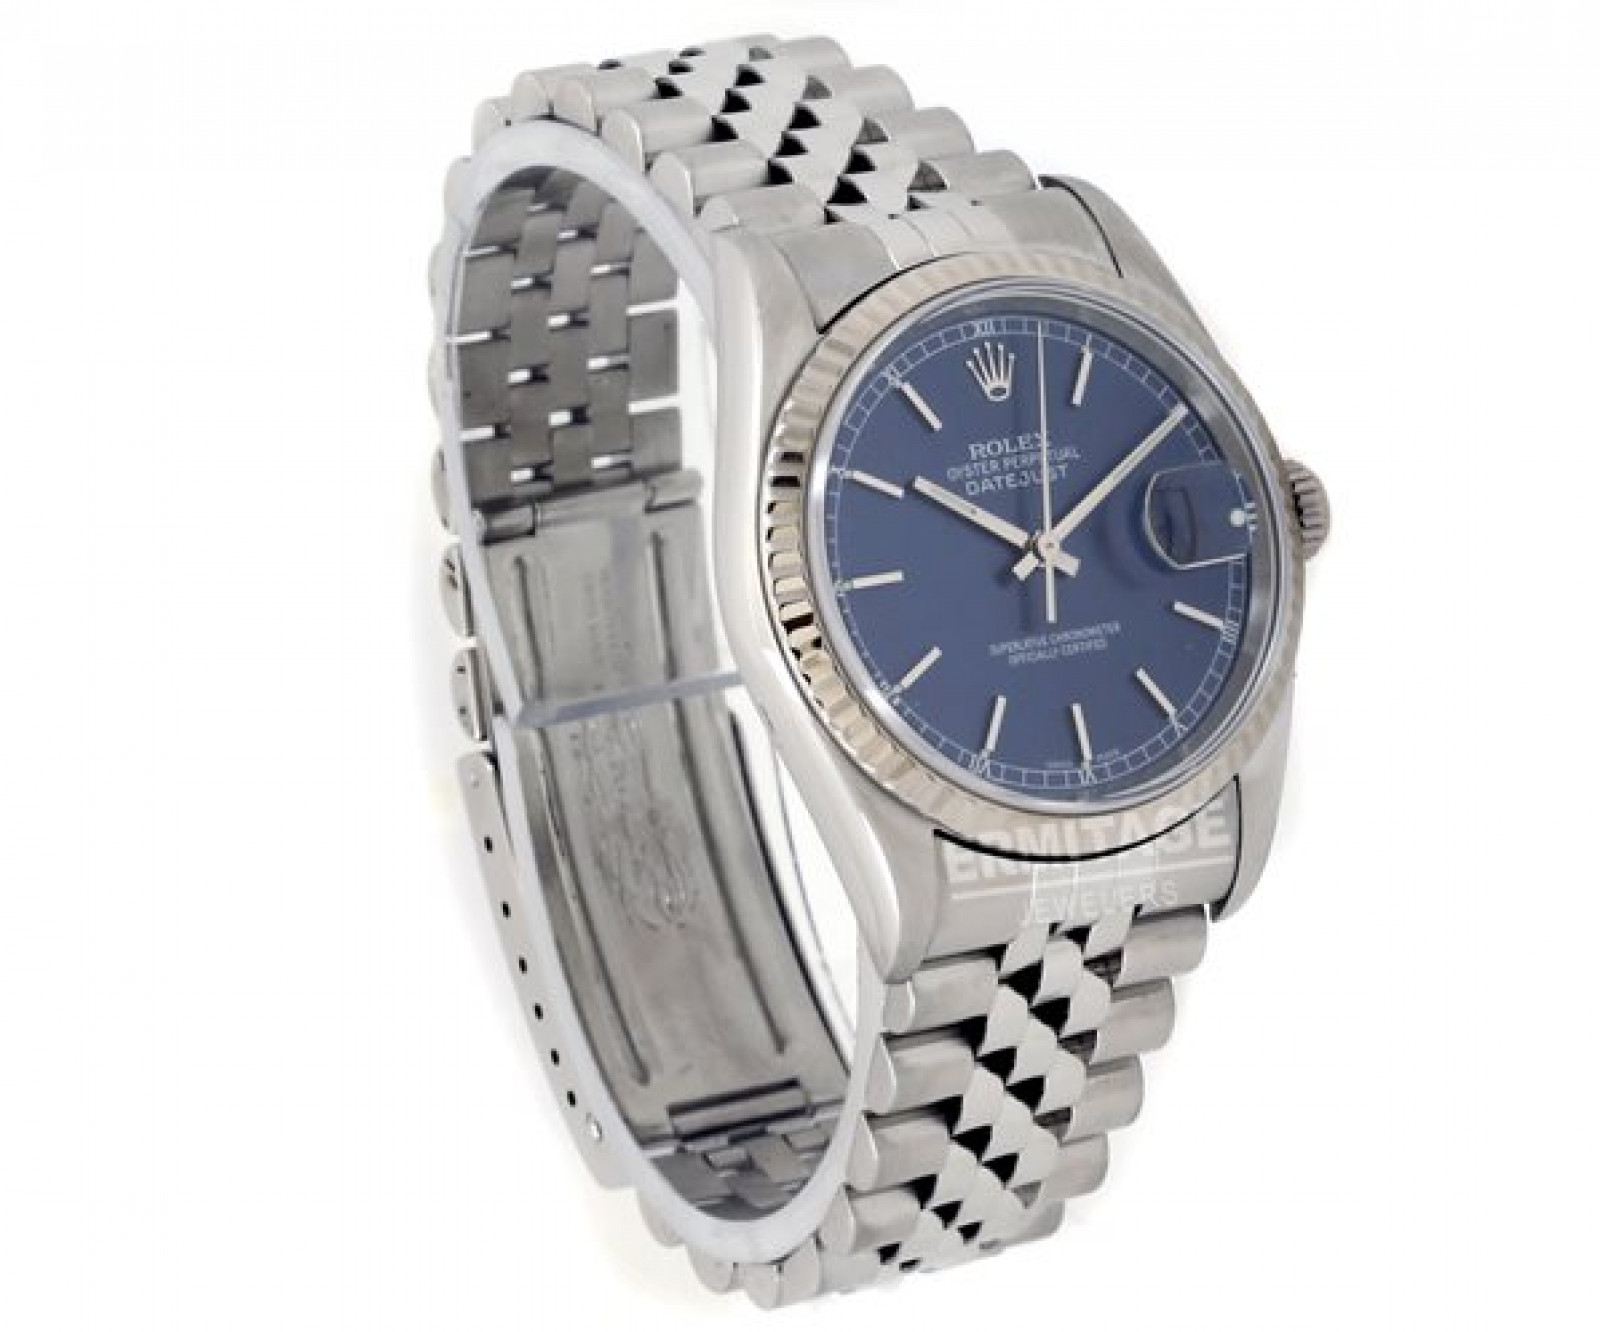 Rolex Oyster Perpetual Datejust 16234 Steel